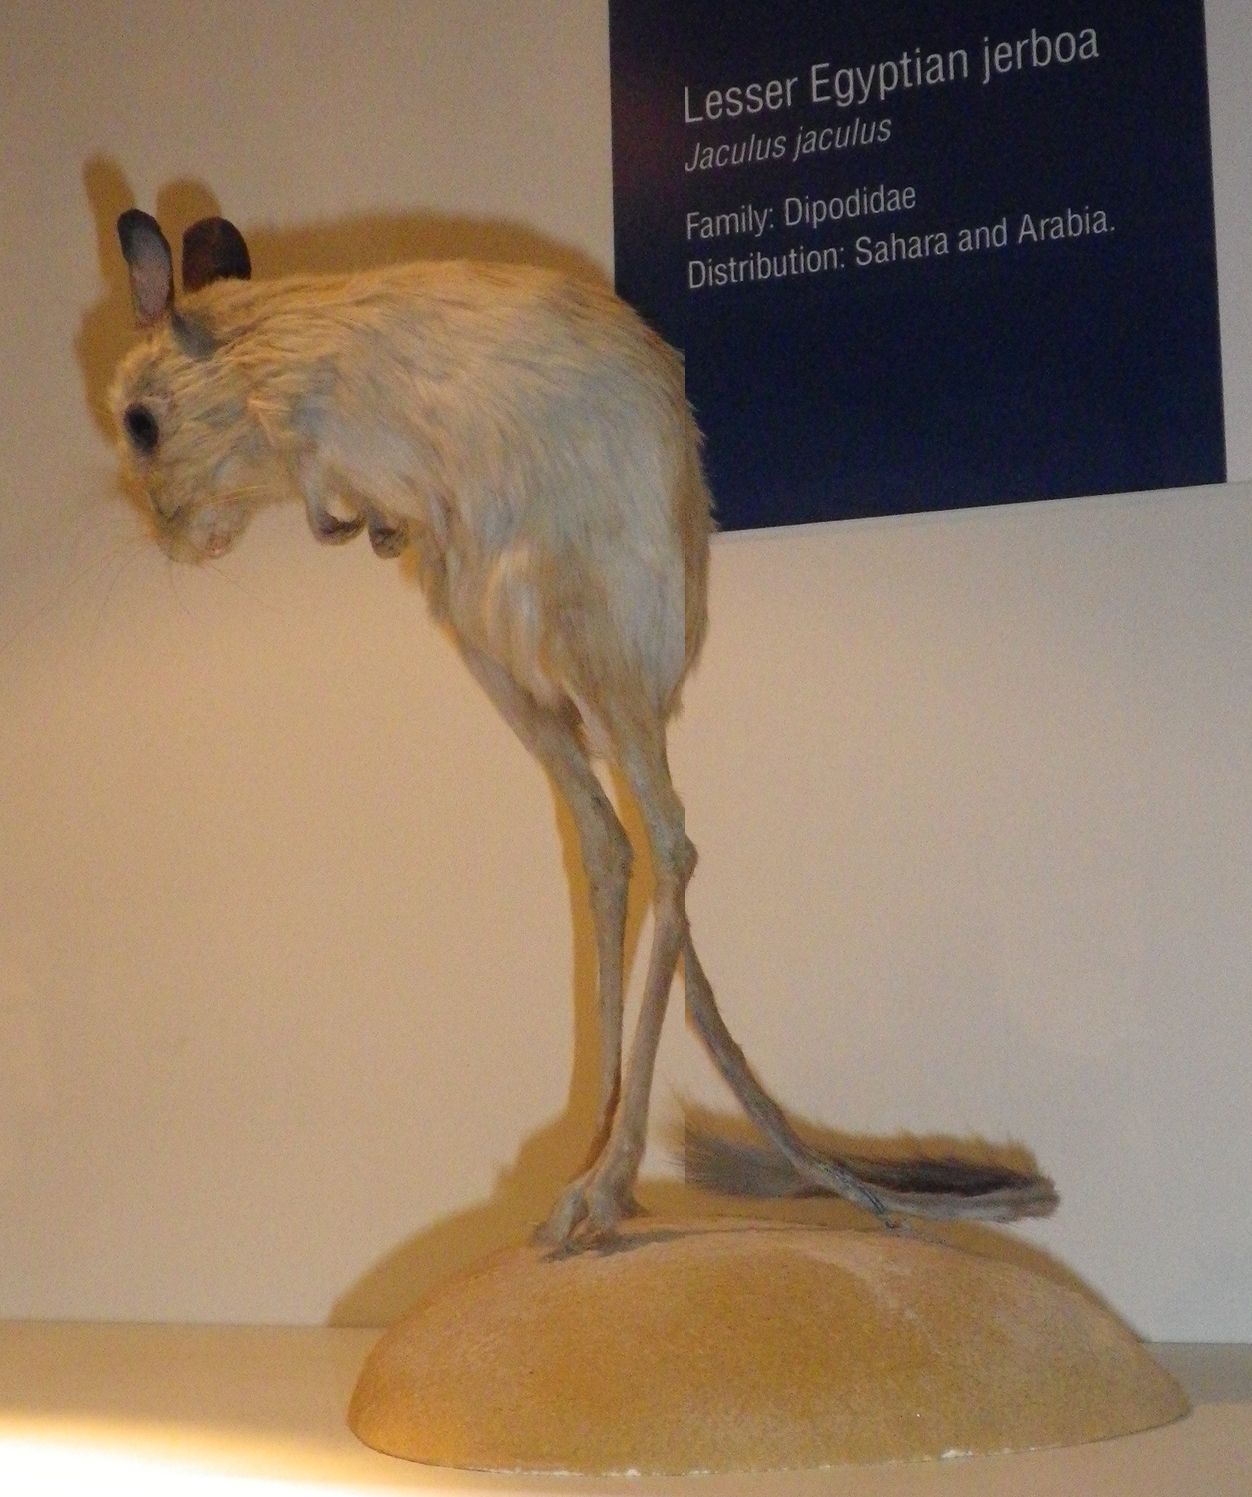 Taxidermied lesser Egyptian jerboa